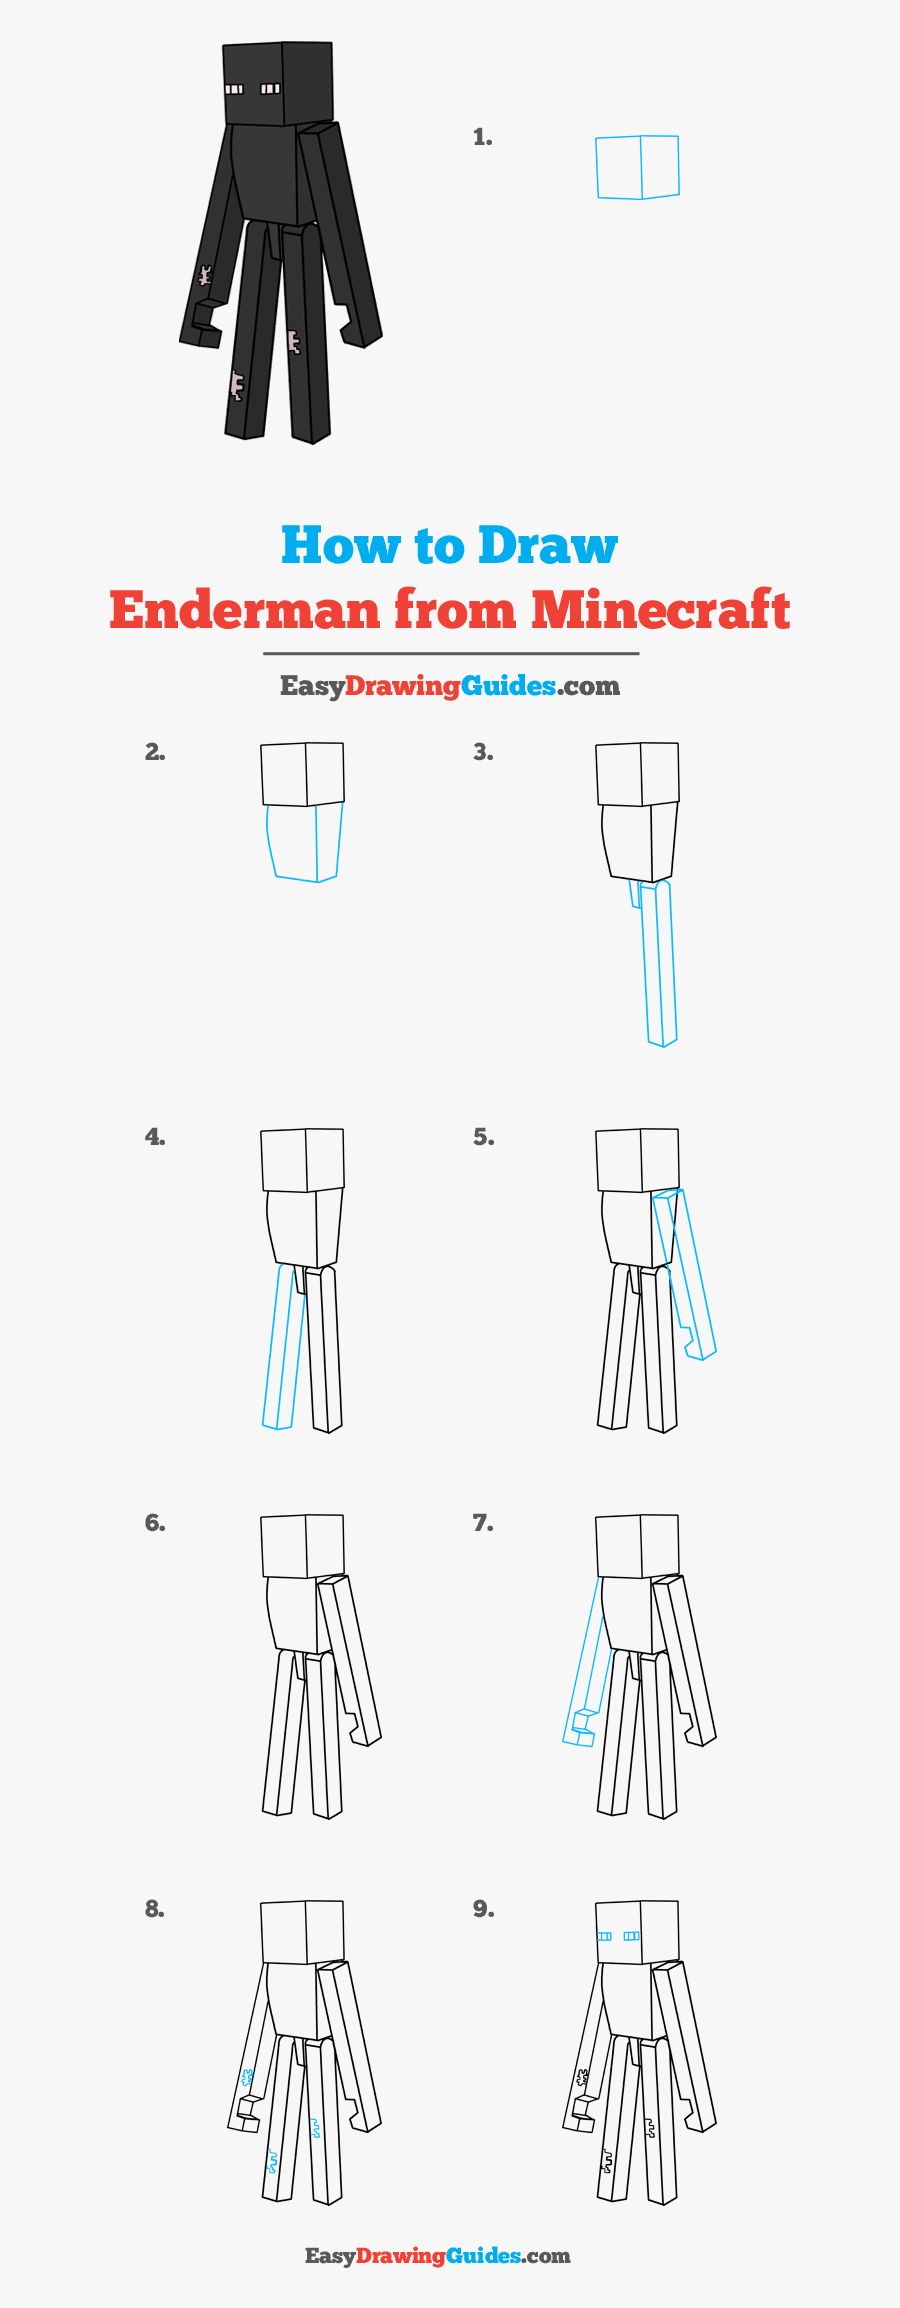 How To Draw Enderman From Minecraft - Minecraft Drawings Enderman, Transparent Clipart